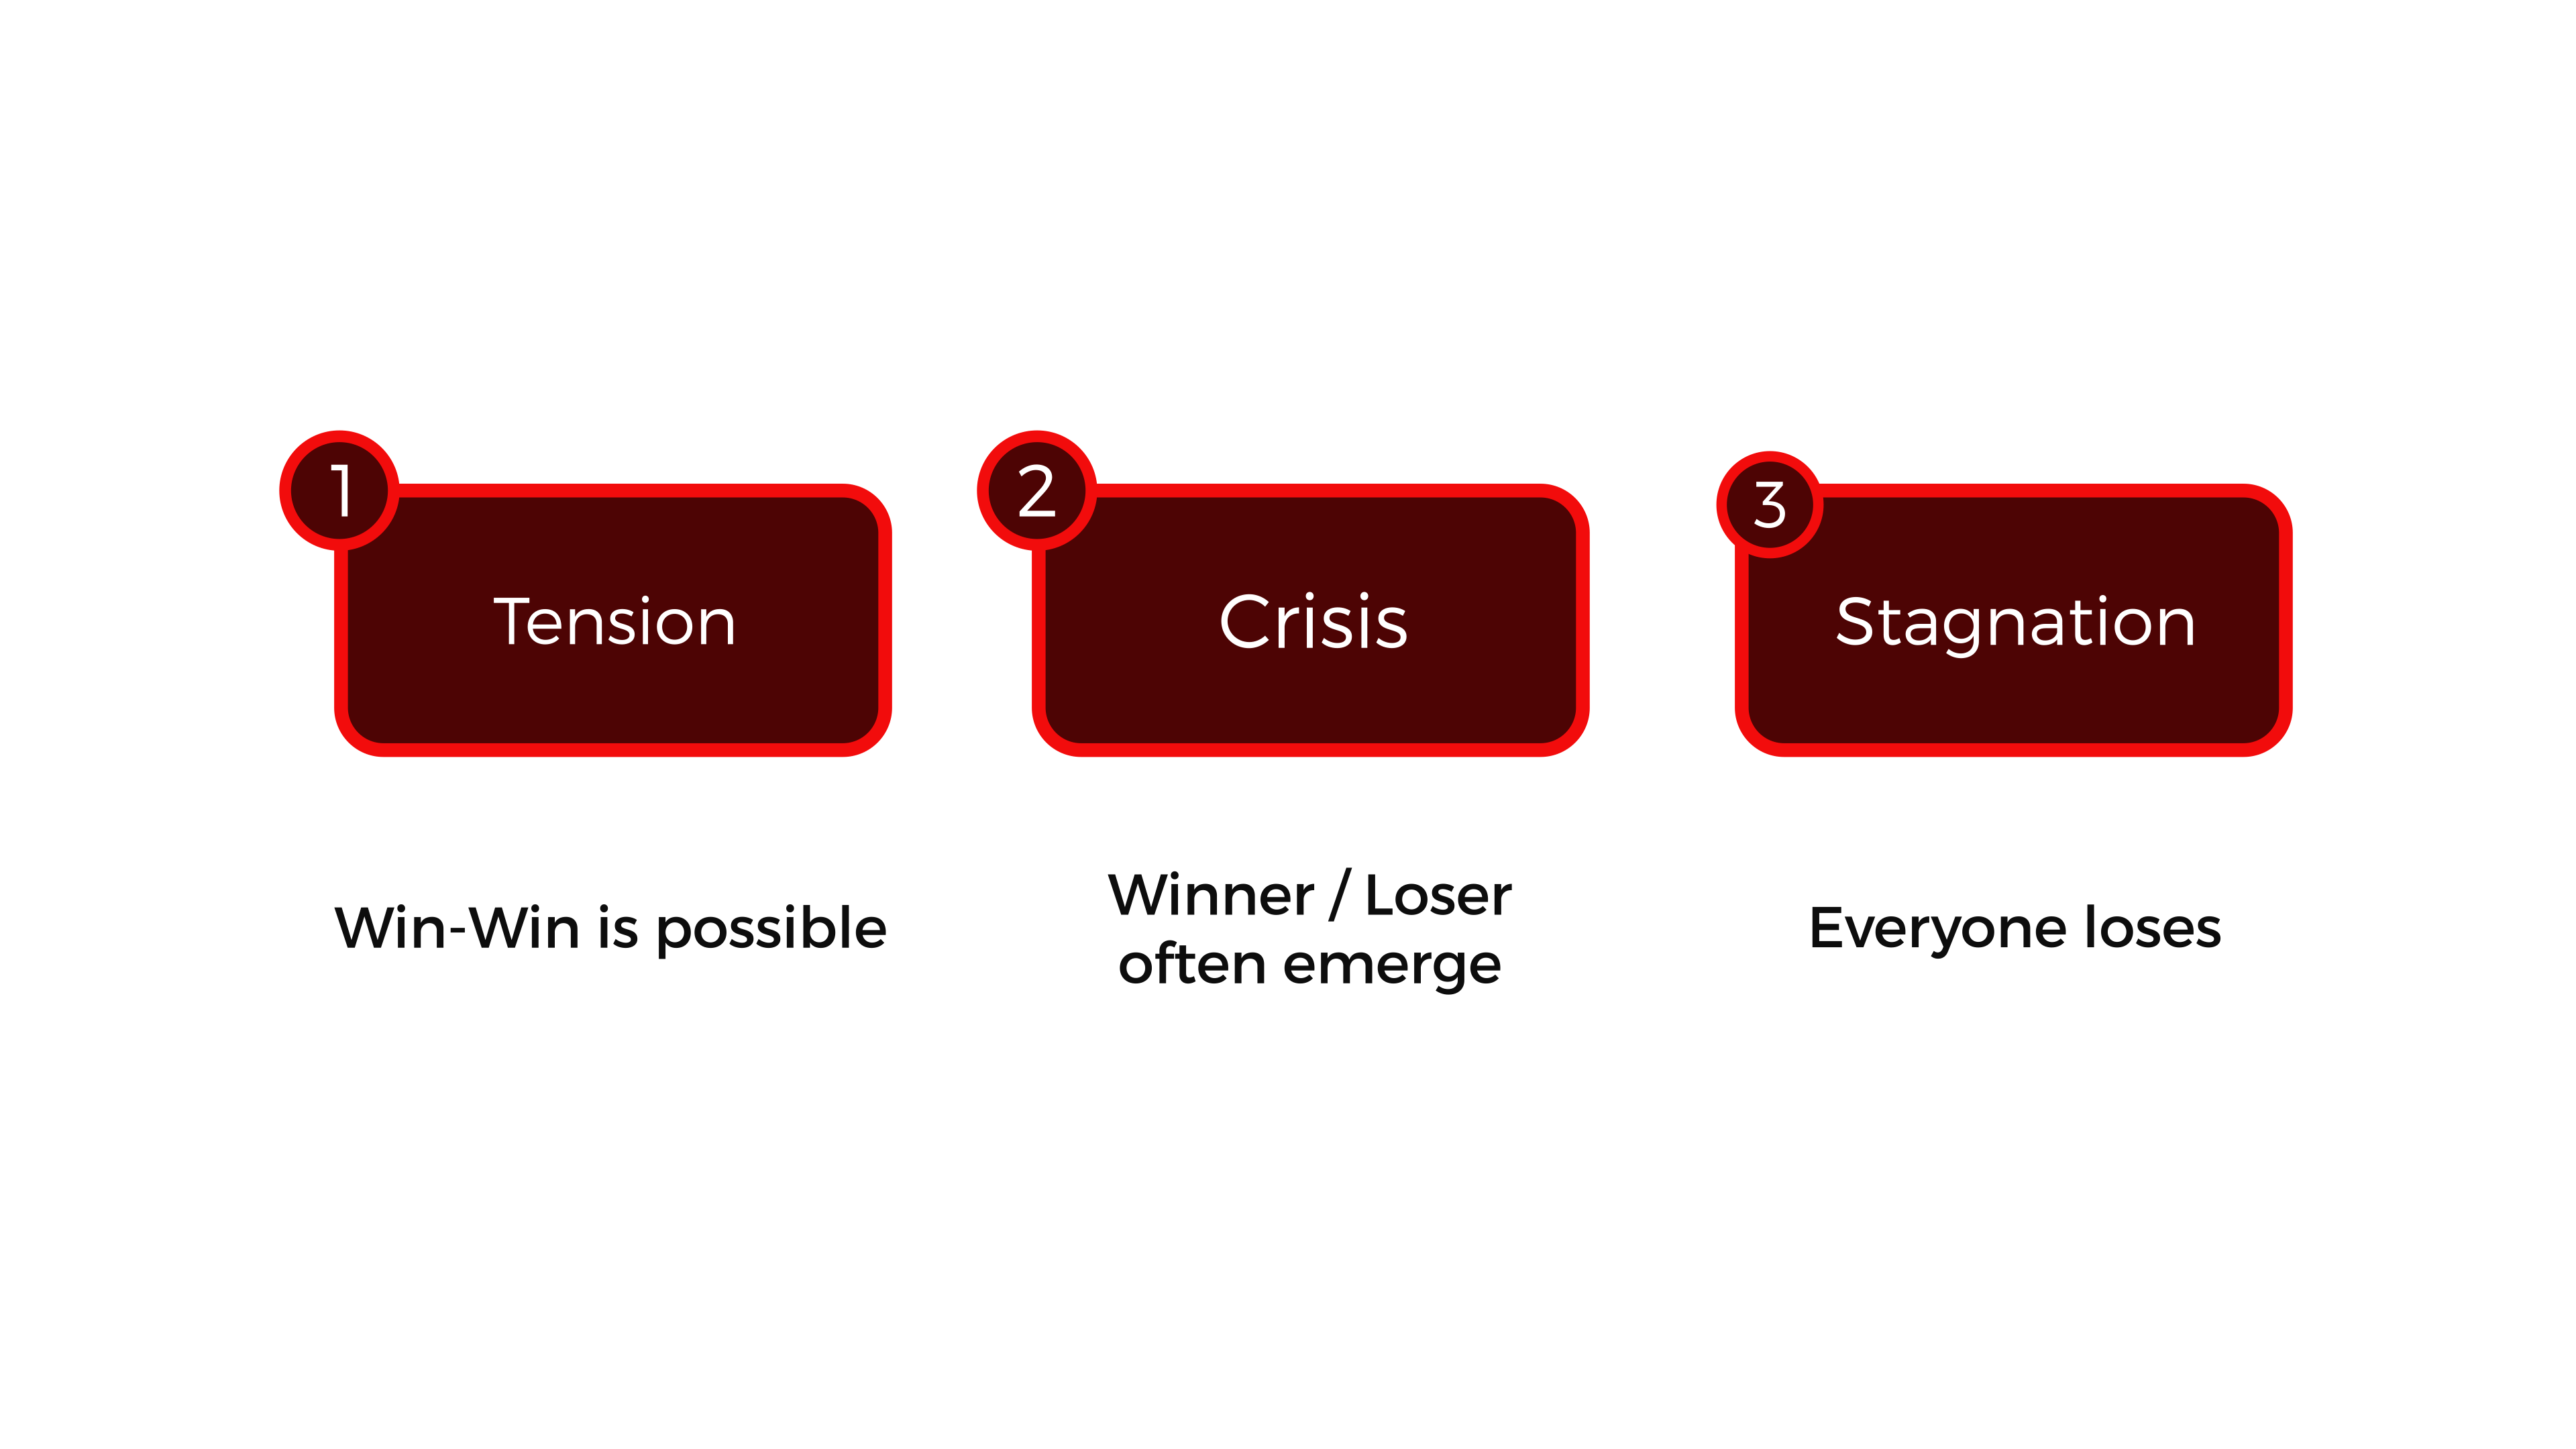 Timeline with three stages of a conflict